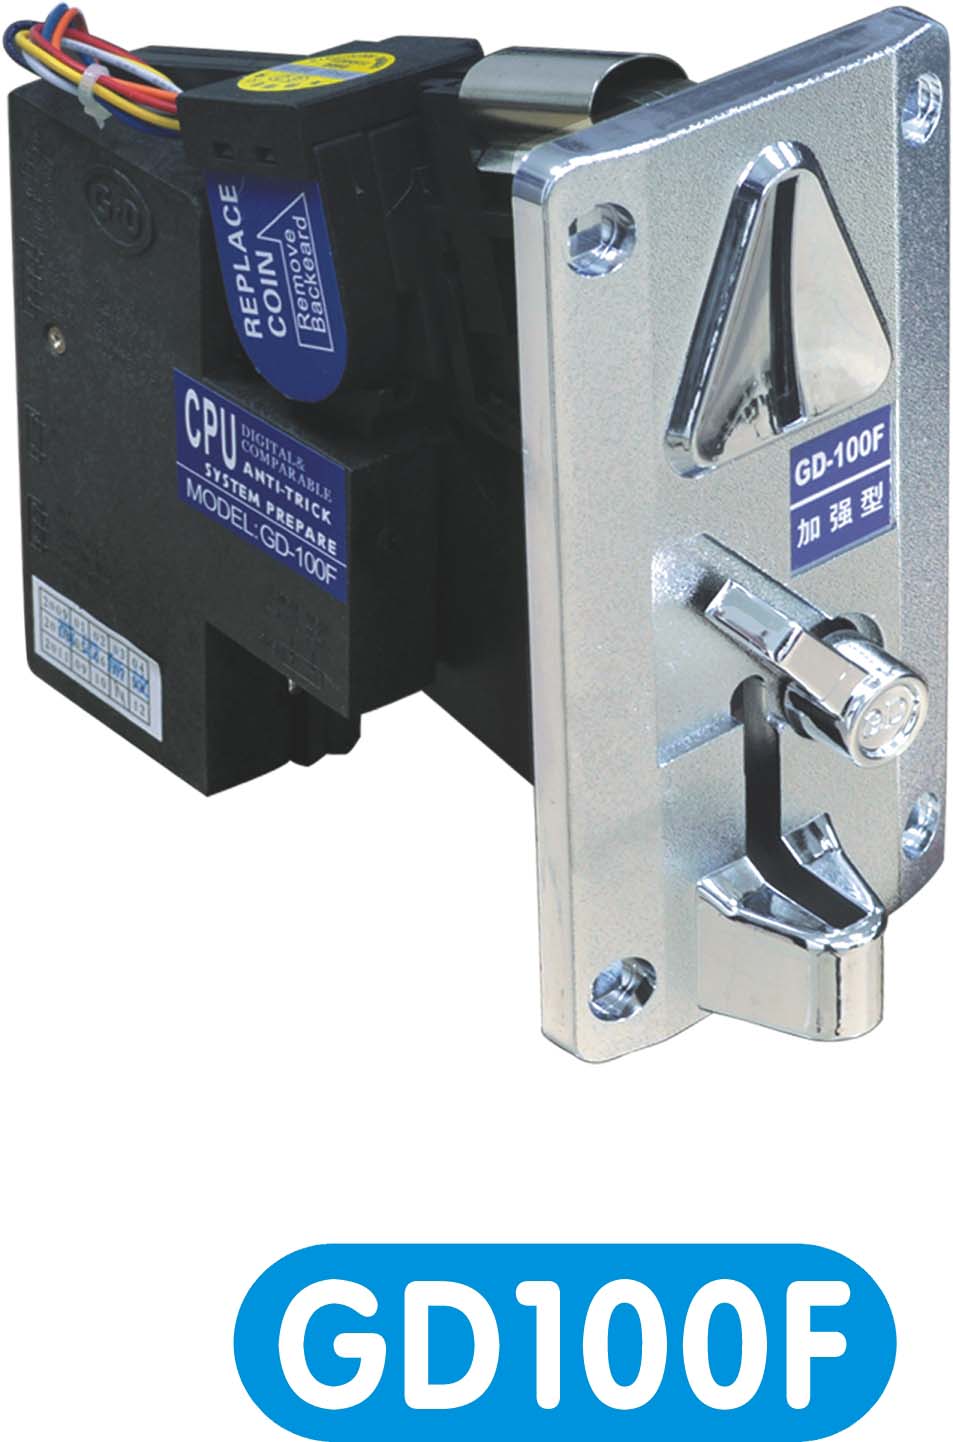 GD100F Comparable Coin Acceptor Selector Validators